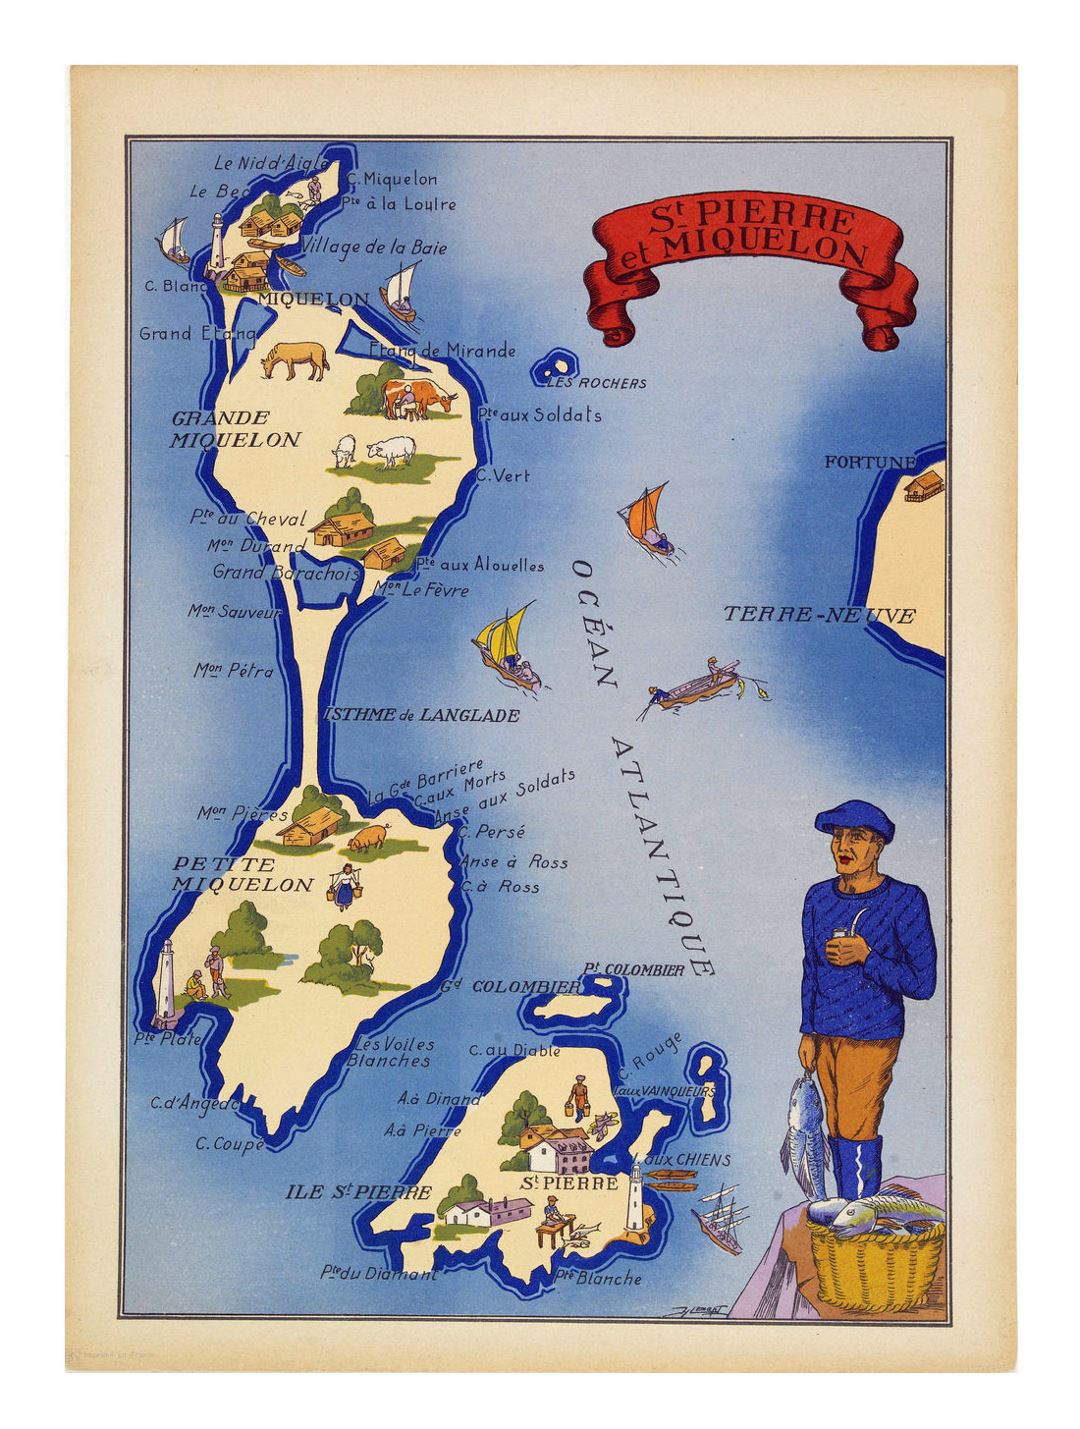 Detailed tourist illustrated map of Saint Pierre and Miquelon